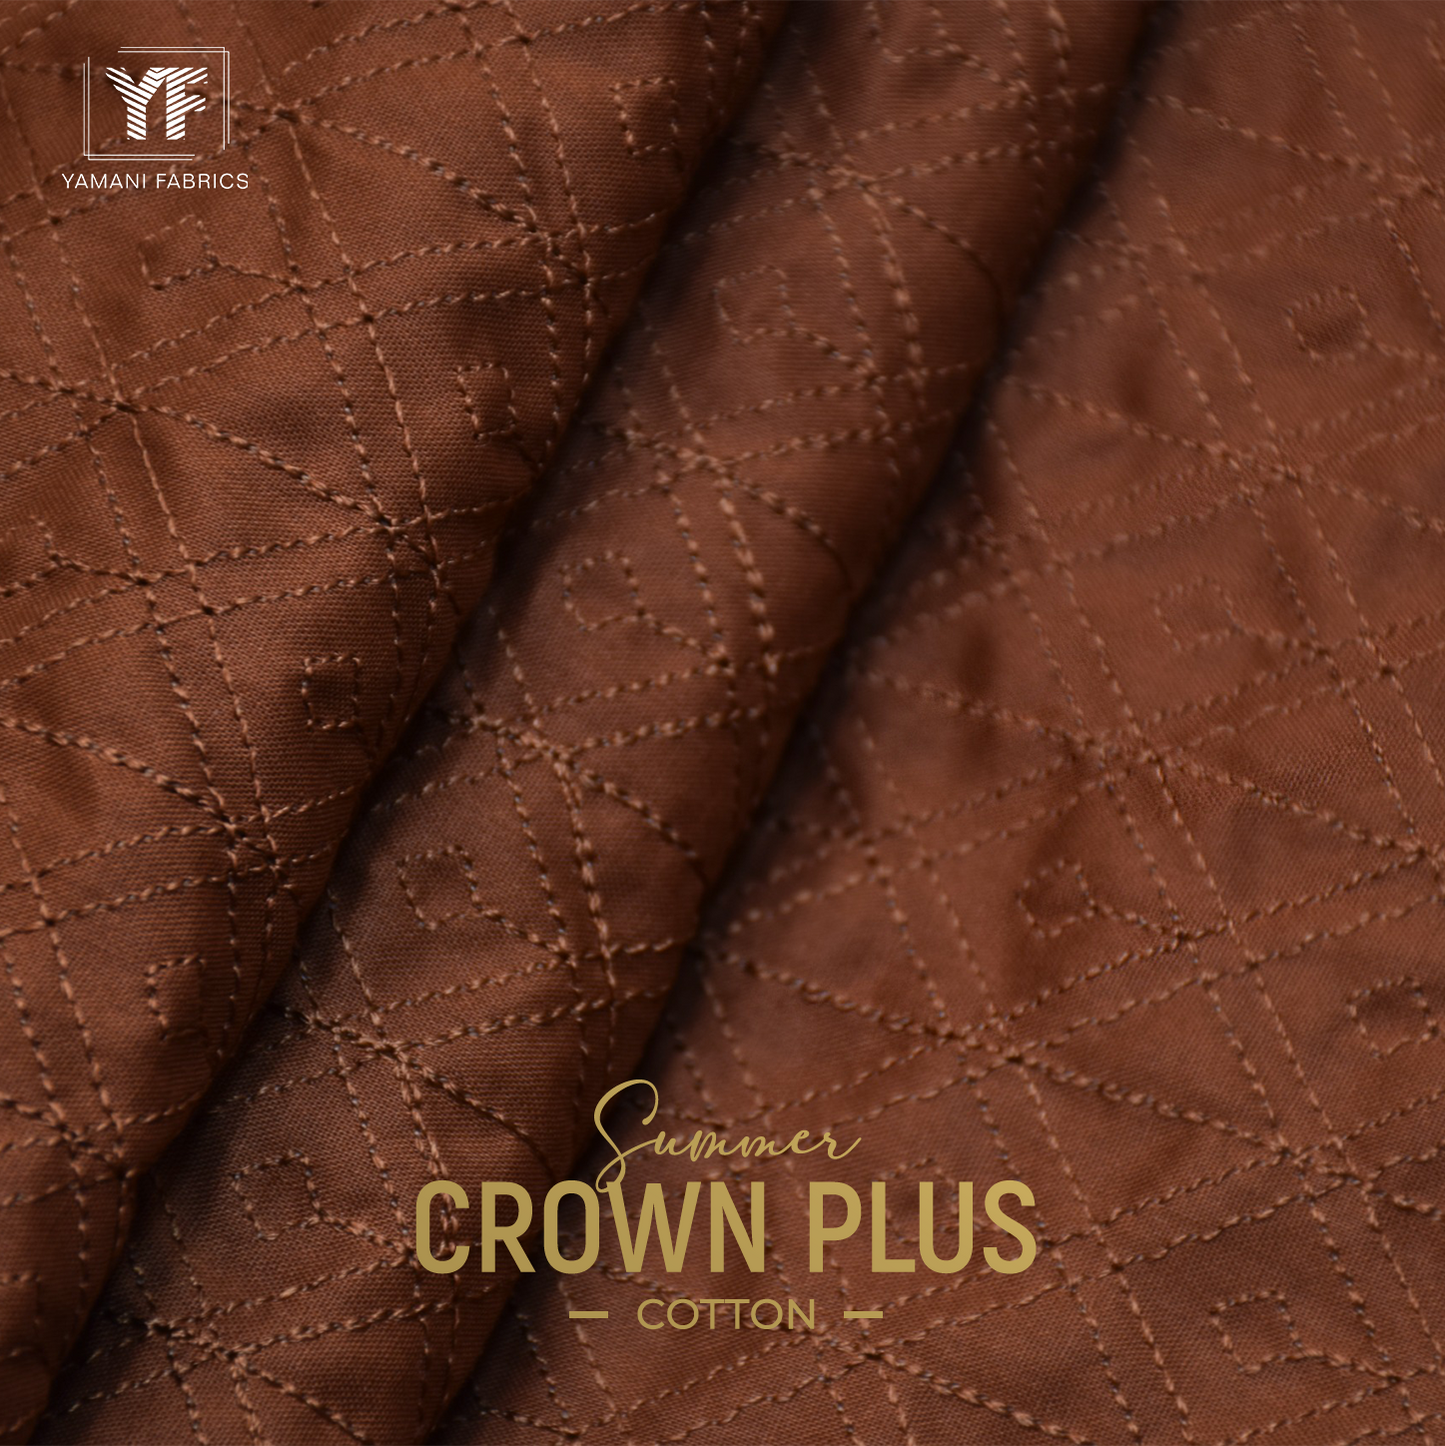 Gents Unstitched Cotton Embroidery Suit (summer Crown Plus 02) rust brown